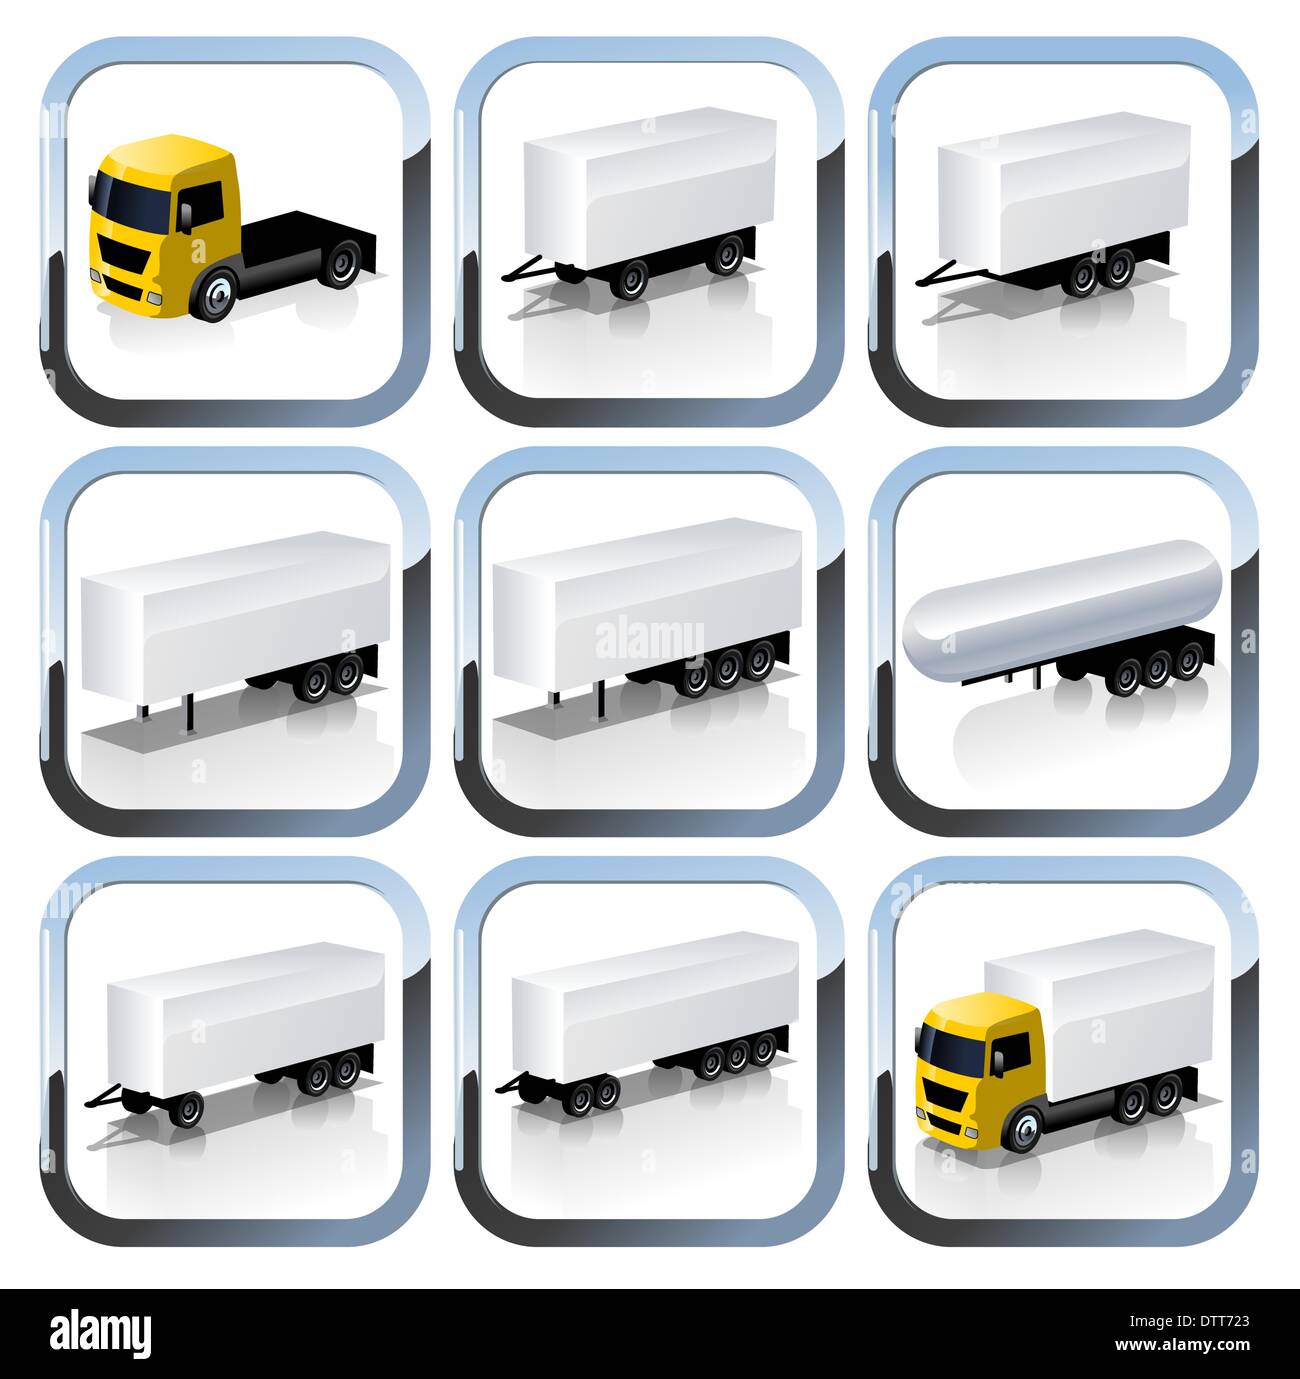 Truck Trailaers Icons Set Stock Photo